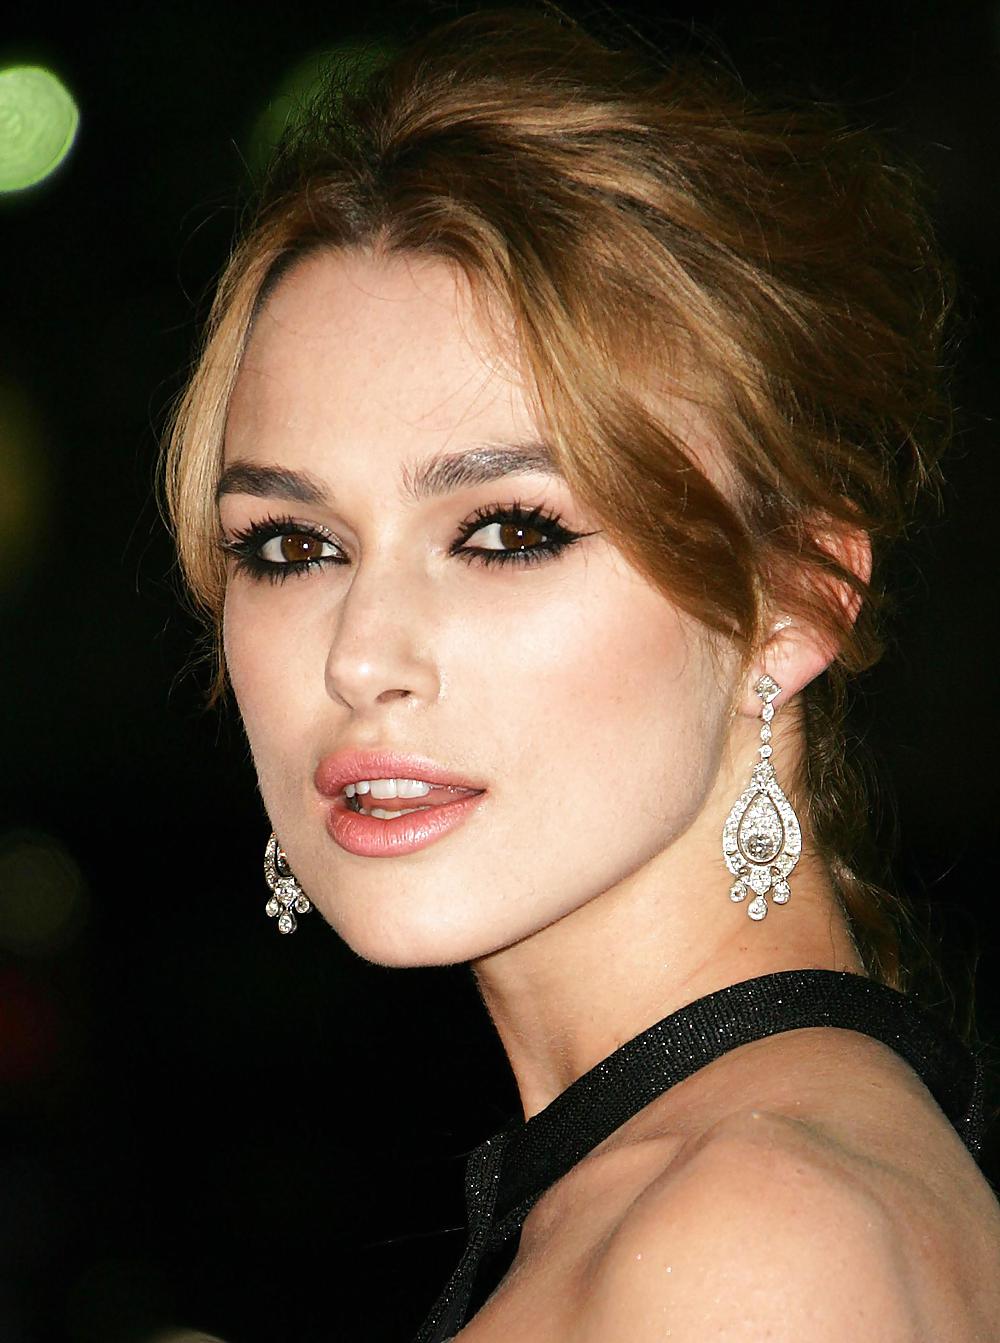 Keira Knightley The Royal Lady of England #35650365